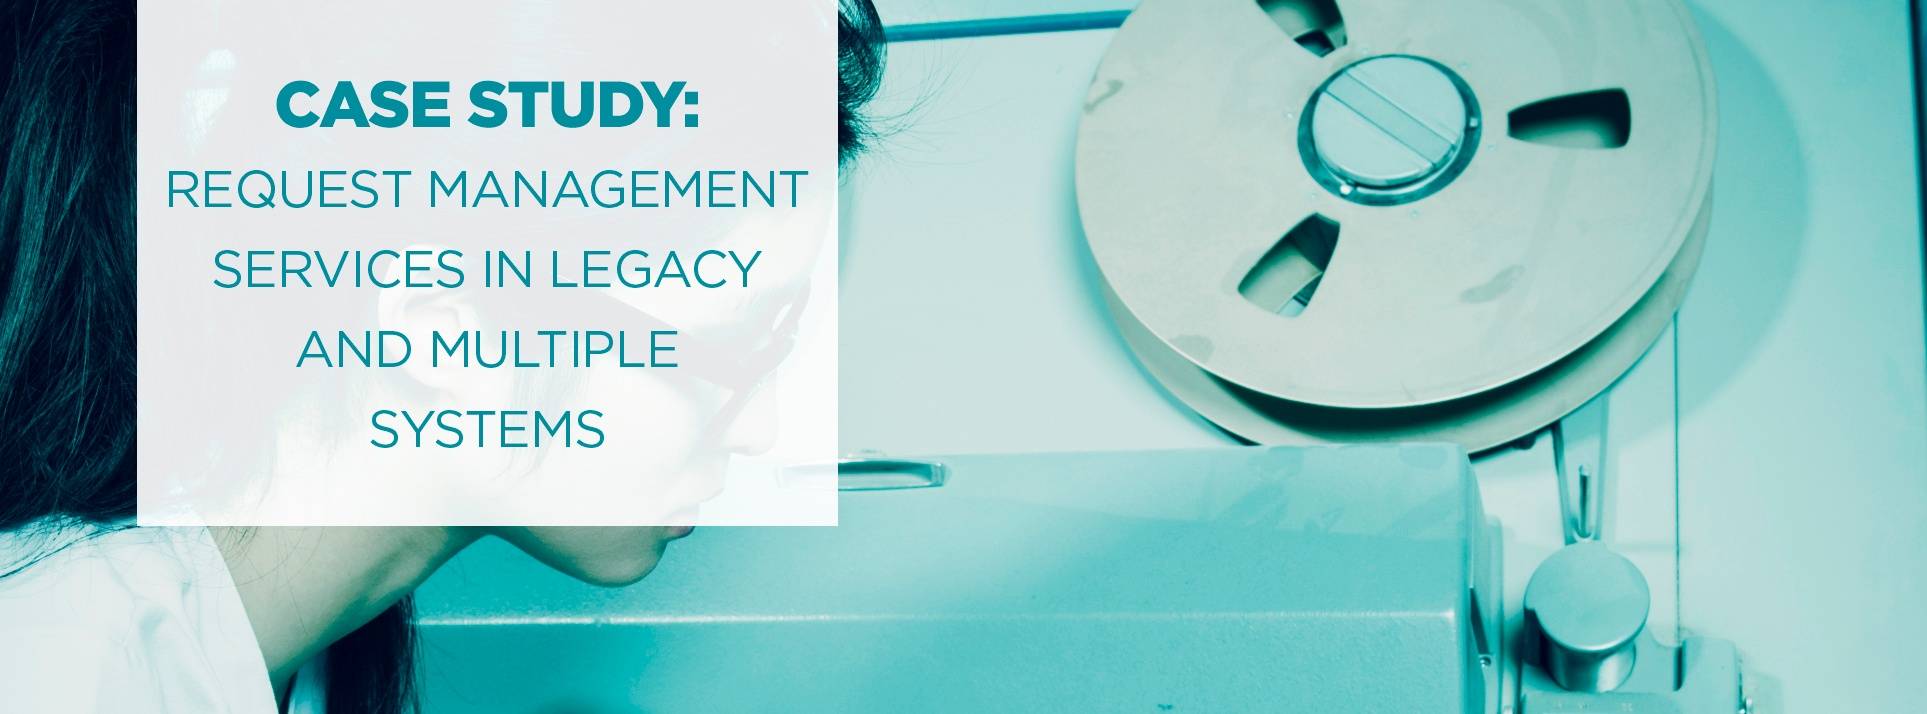 Request management services in legacy and multiple systems Case Study